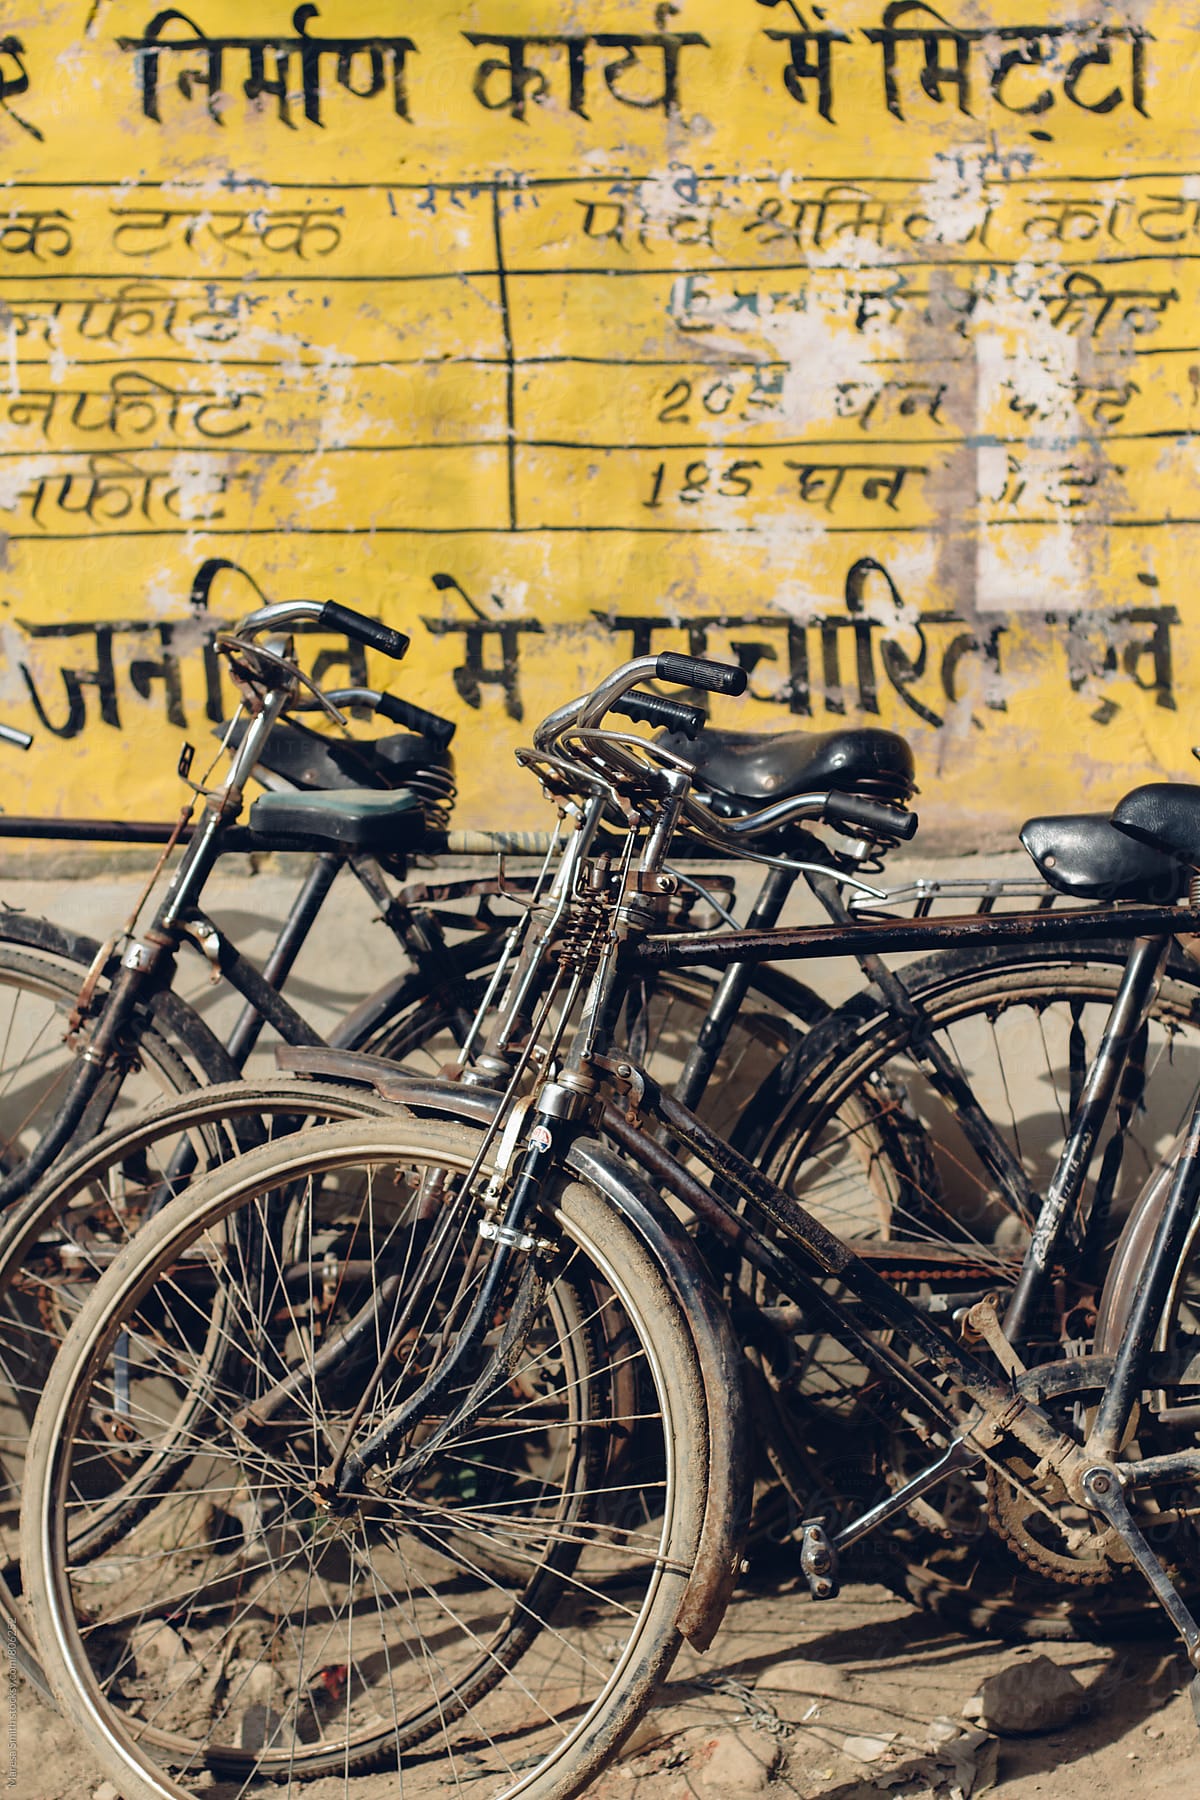 Dusty black bikes leaning on a yellow wall in India